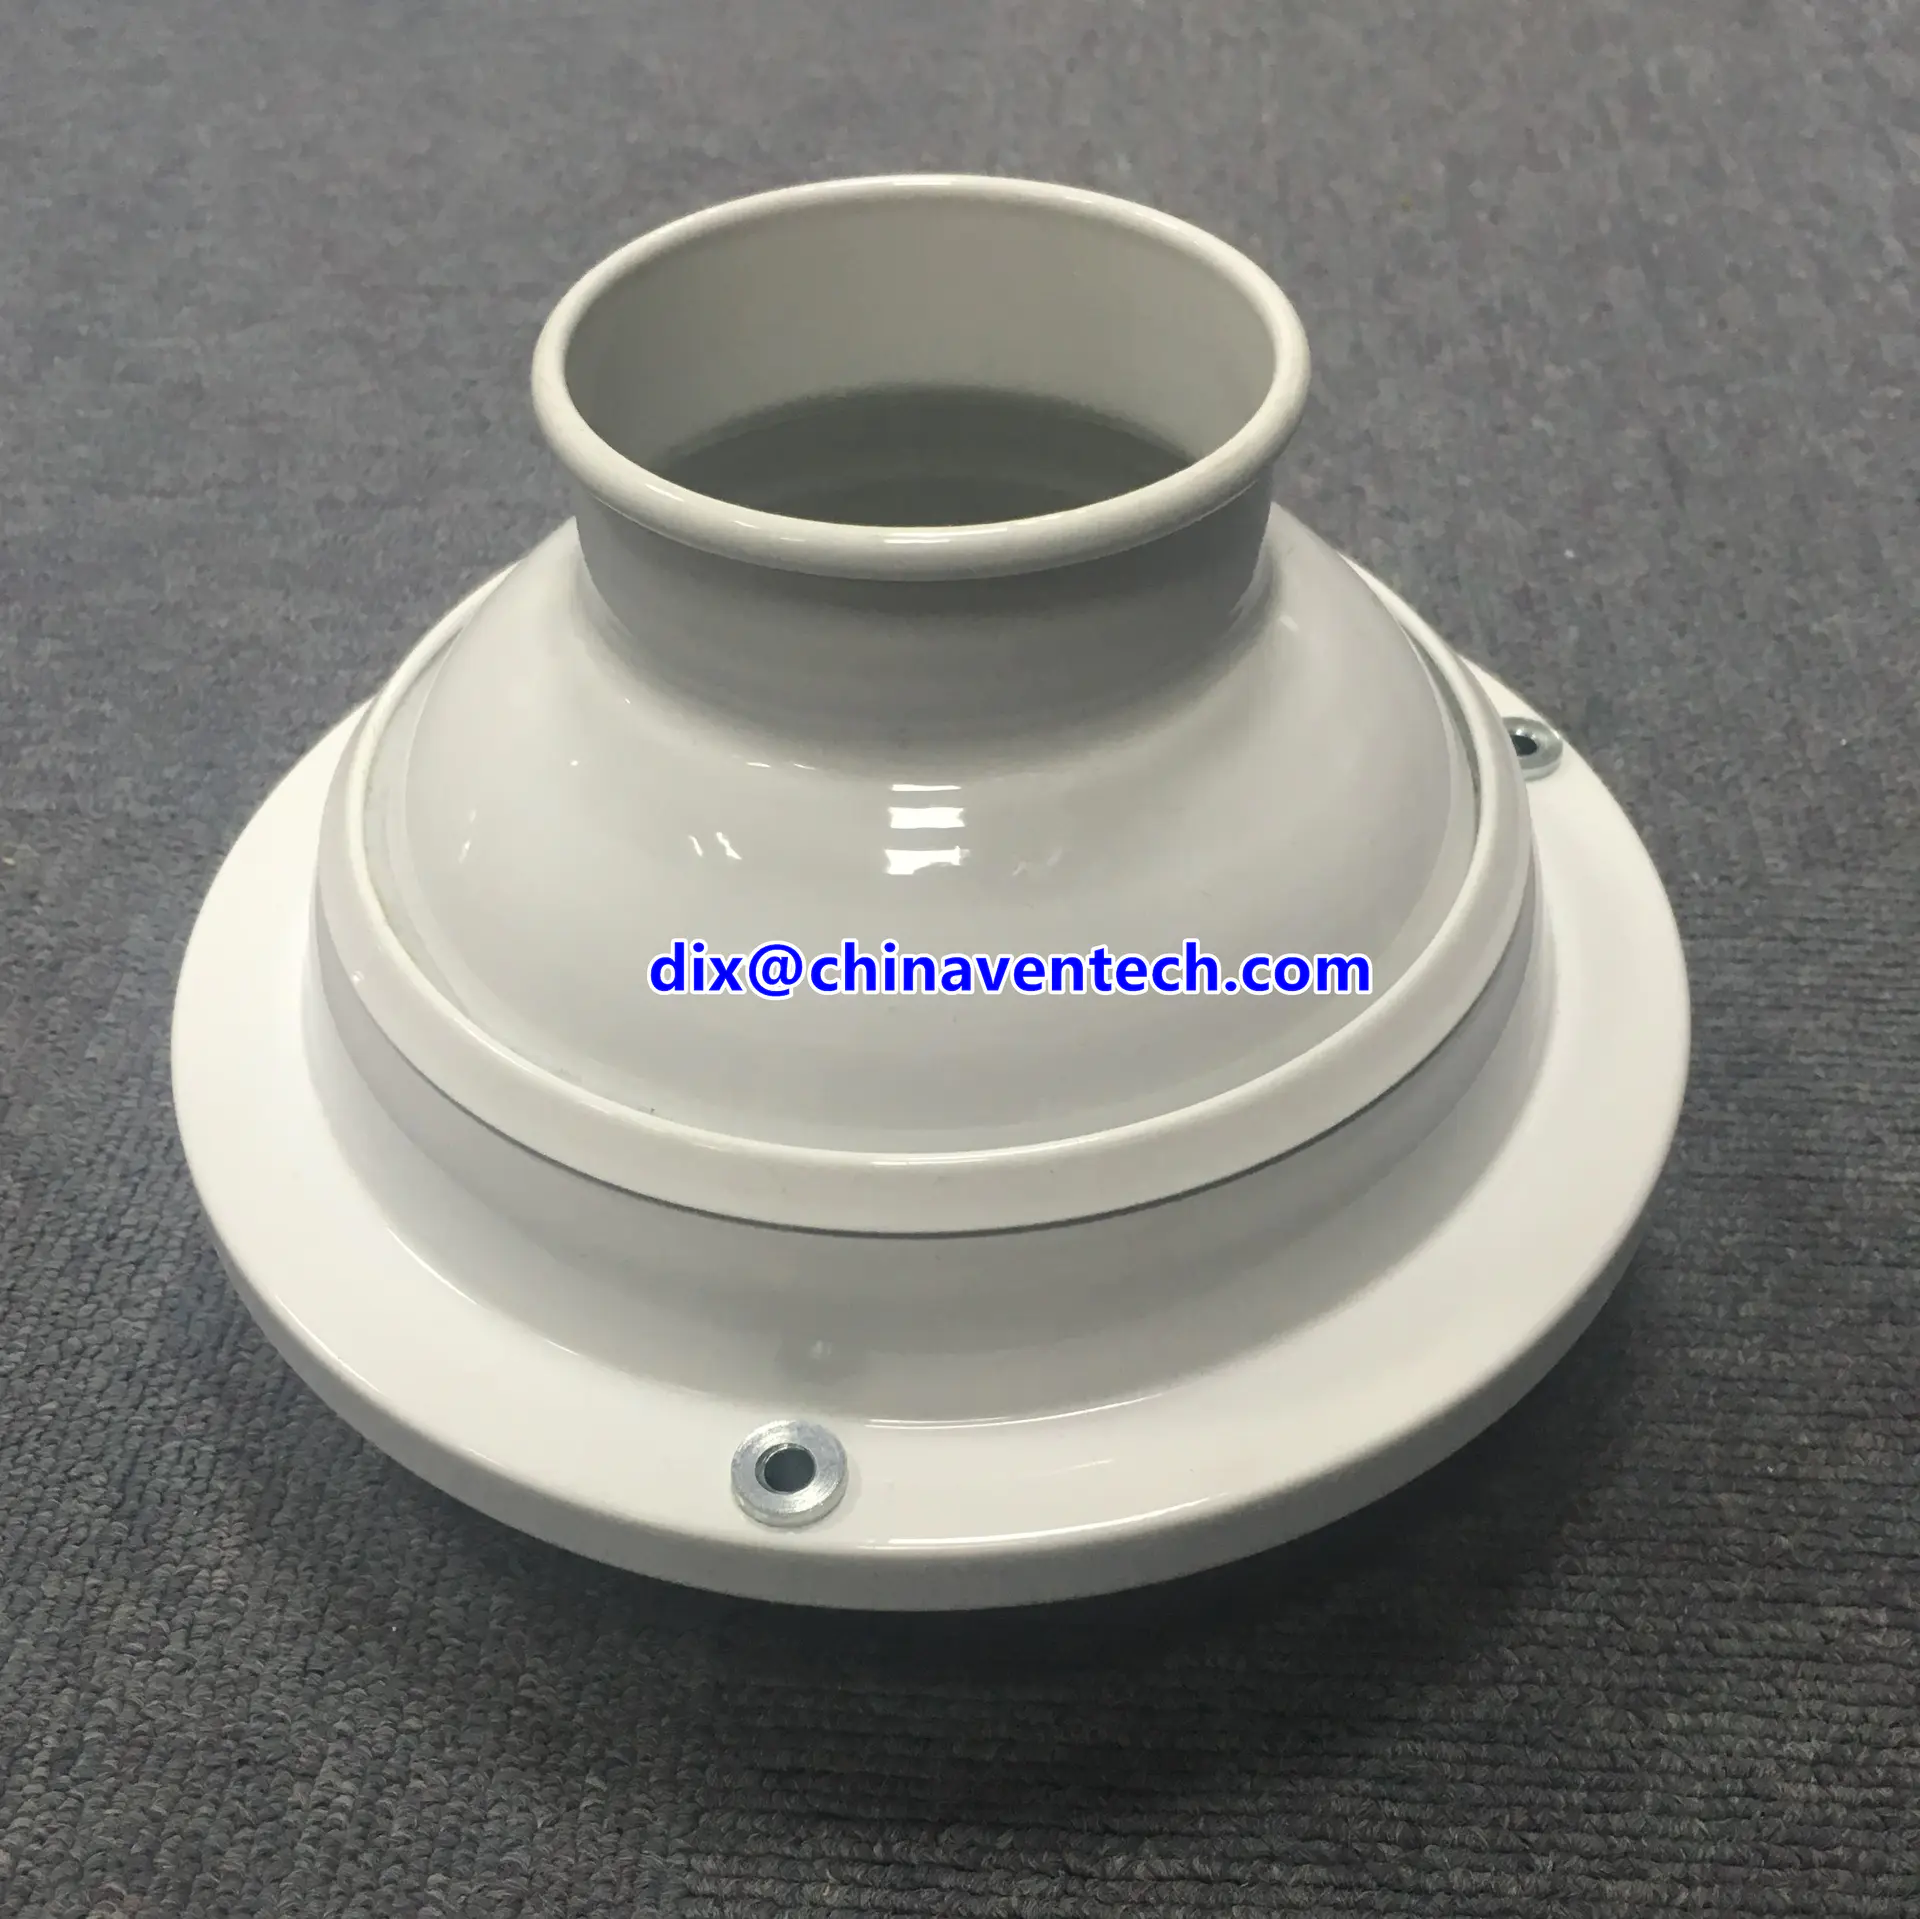 Hvac round ceiling diffuser air ventilation ball jet nozzle jet diffusers